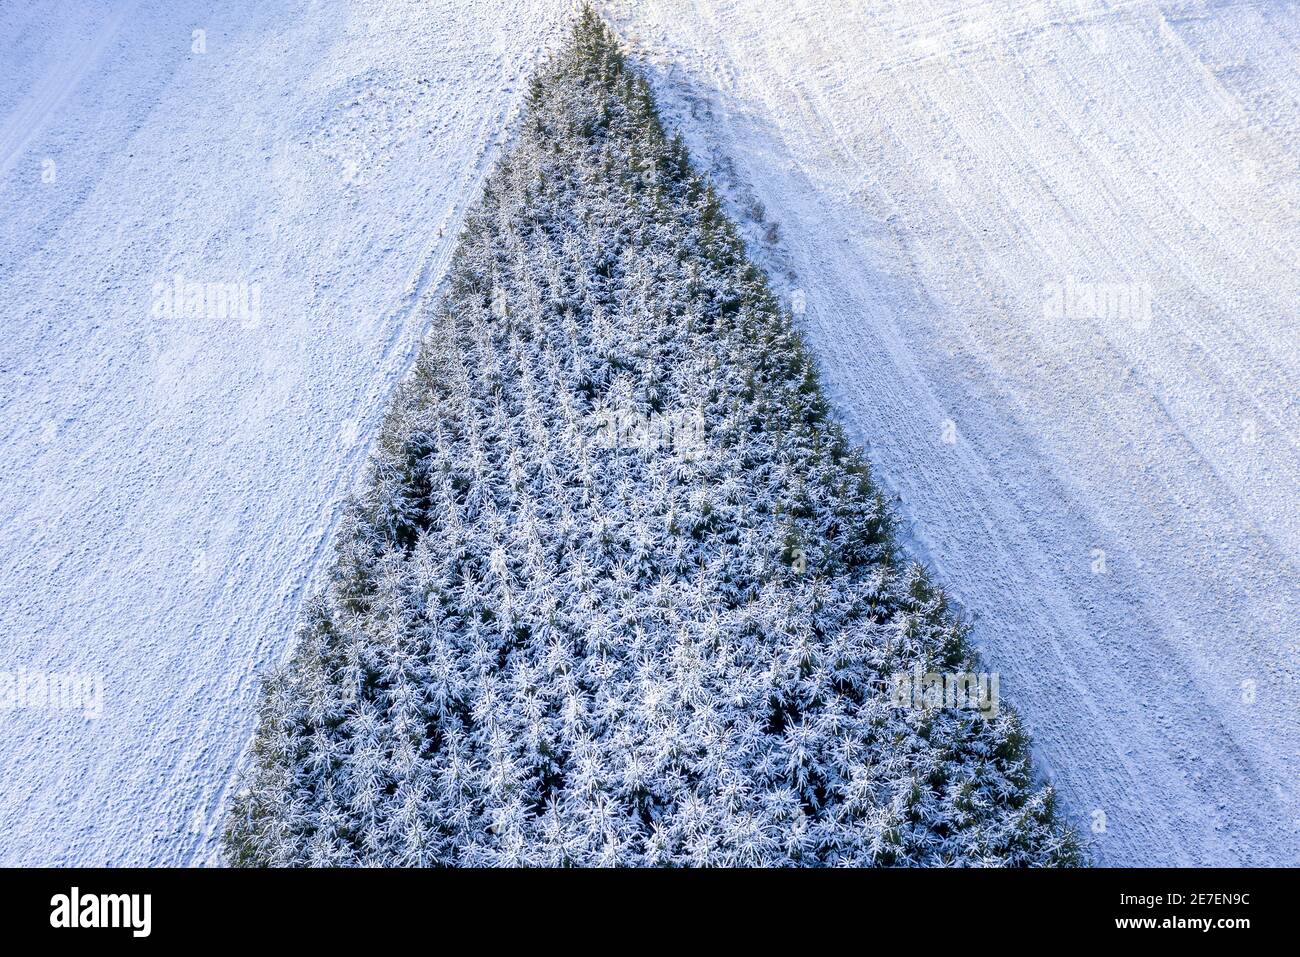 Christmas trees covered in snow Stock Photo